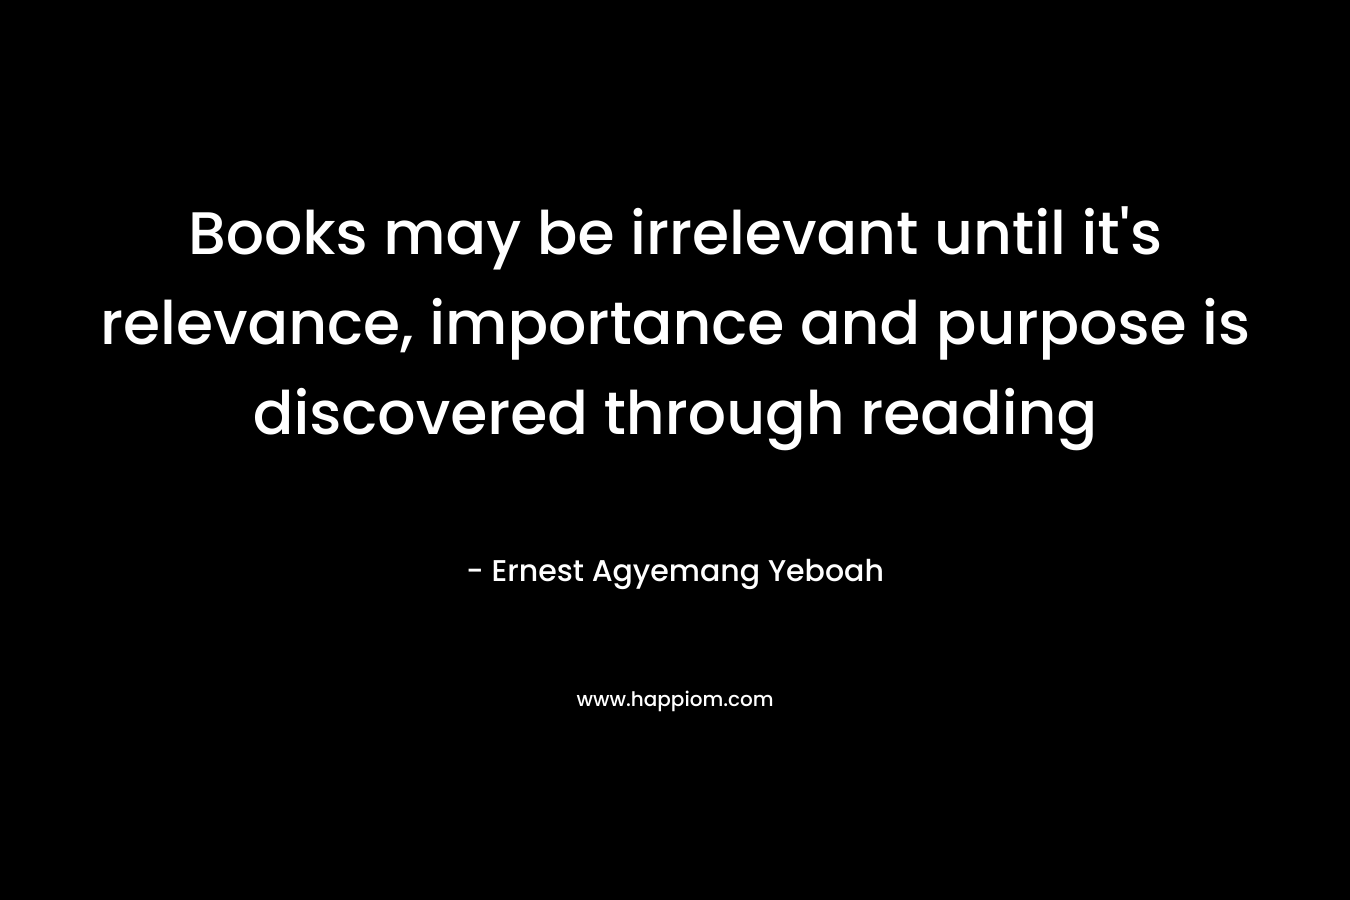 Books may be irrelevant until it's relevance, importance and purpose is discovered through reading